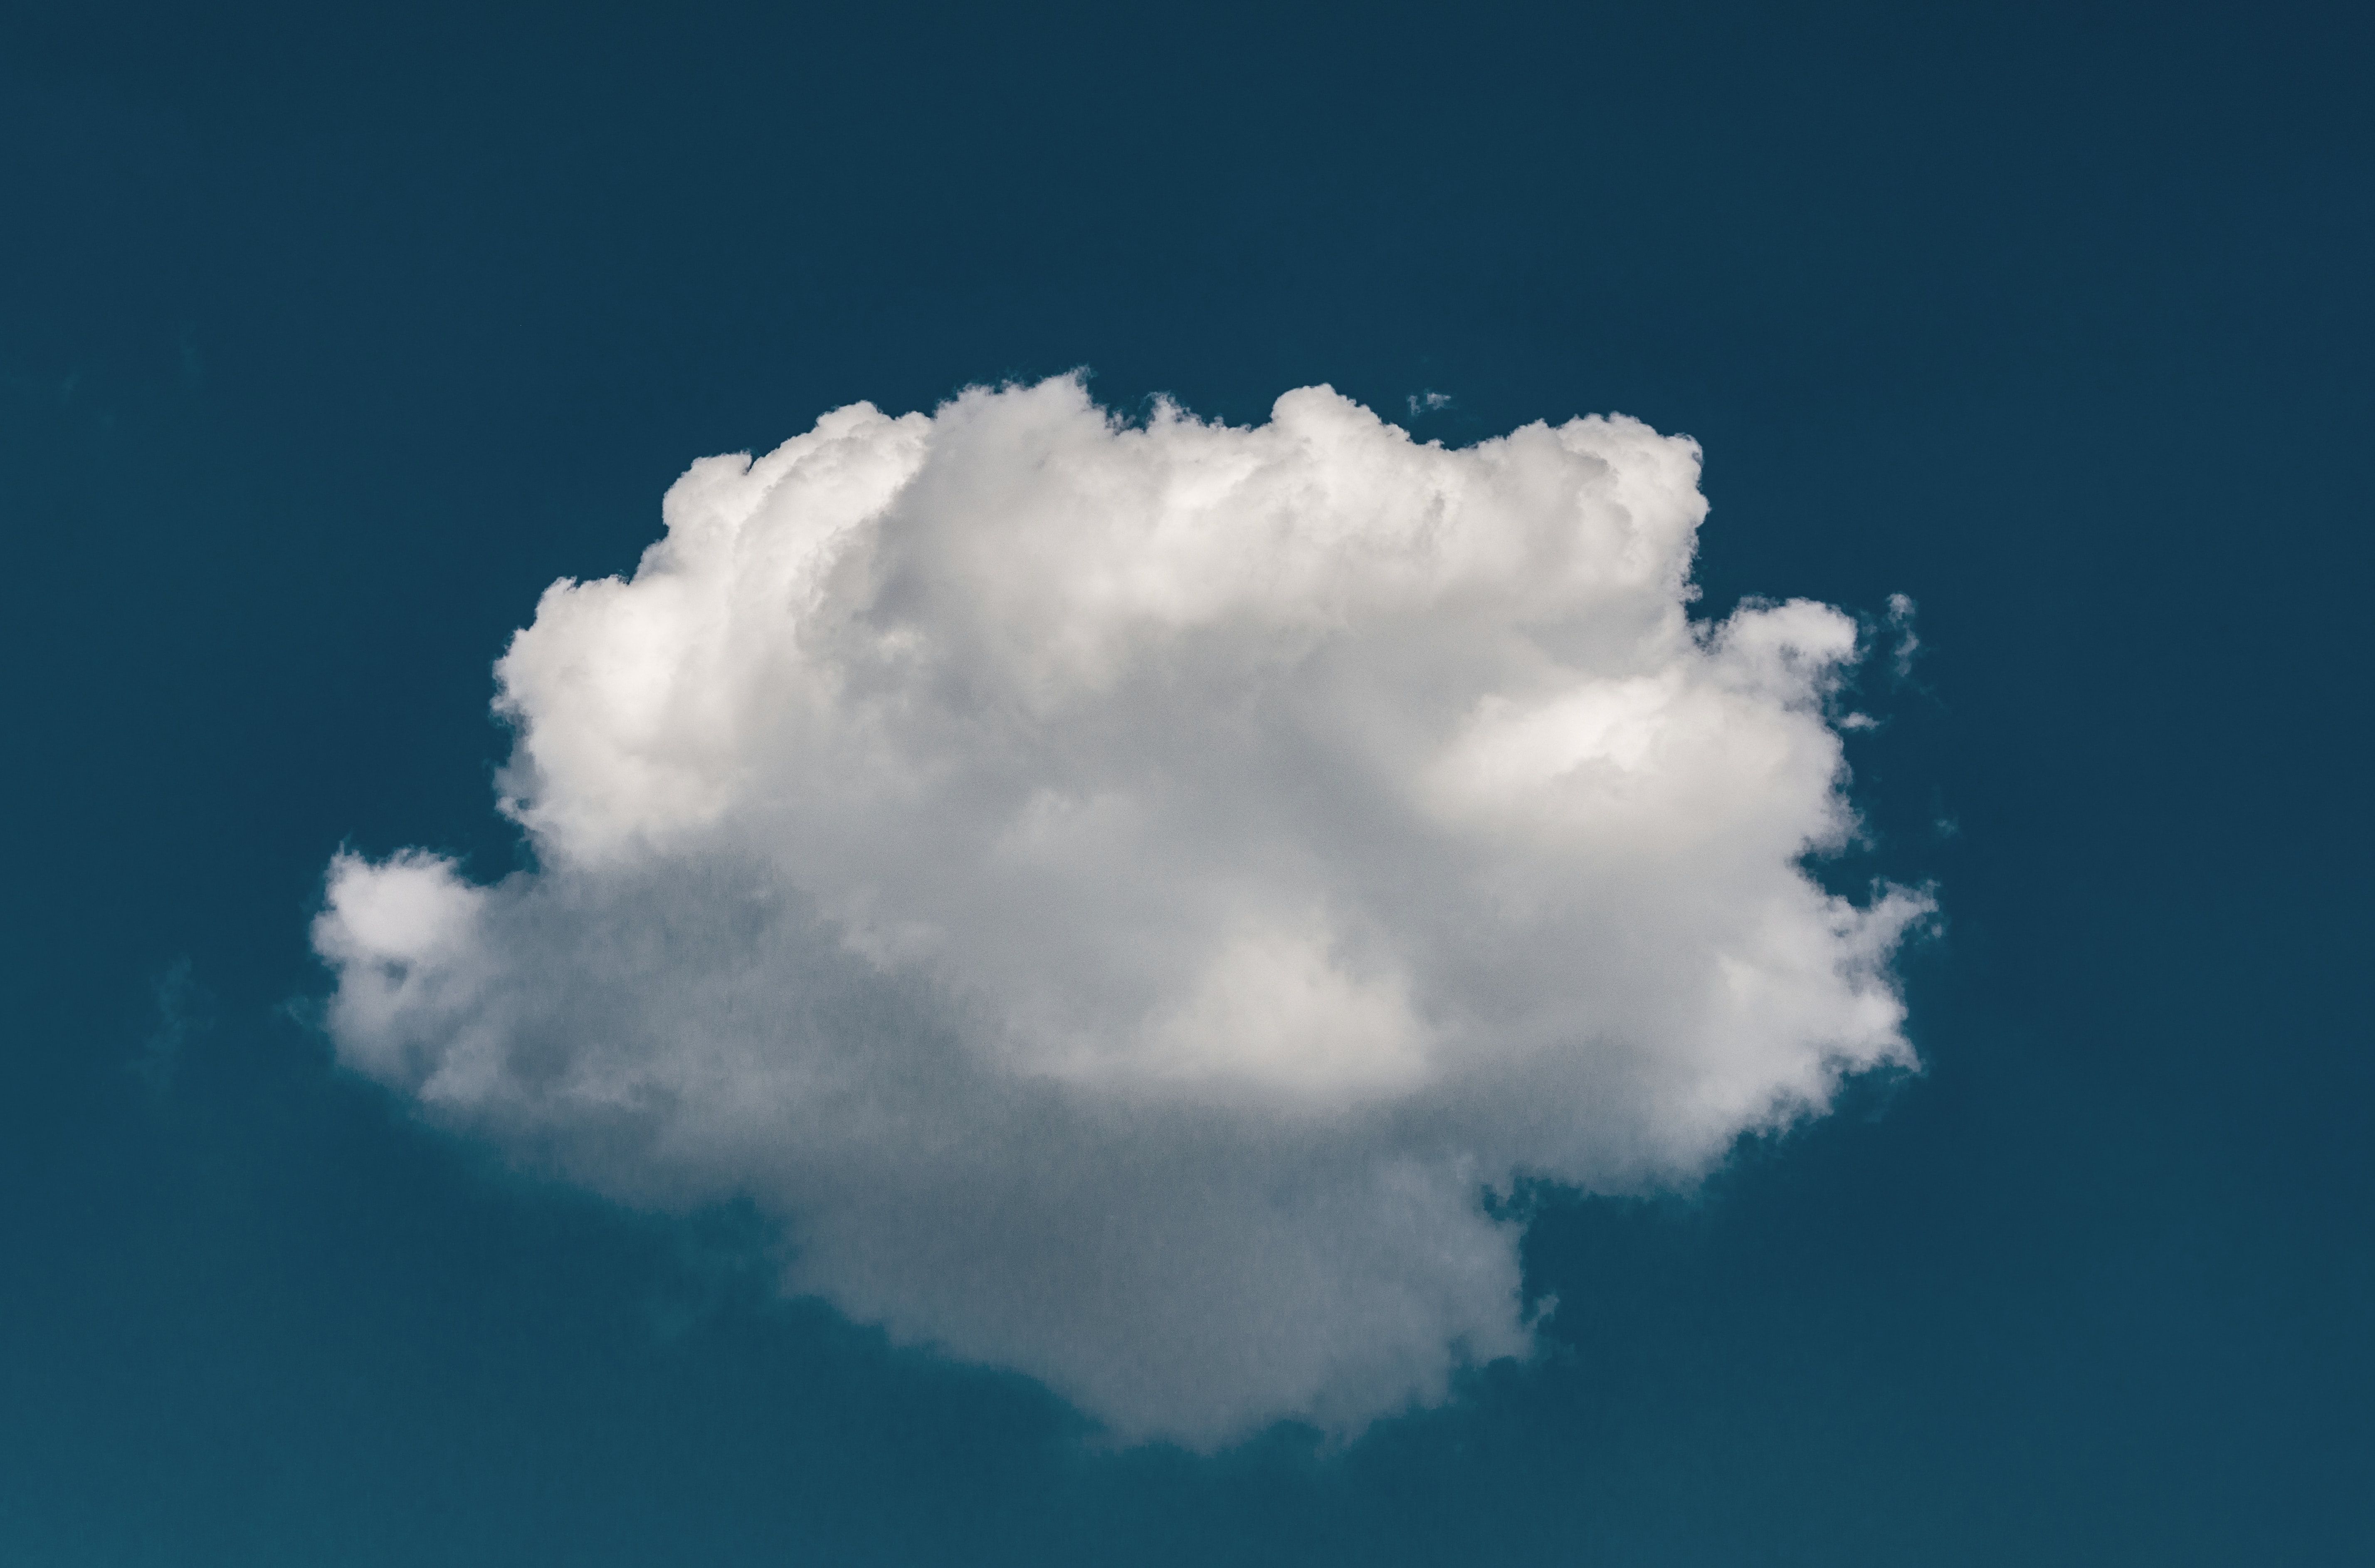 Cloud Computing Explained: What is Serverless SQL and Why Should You Care?